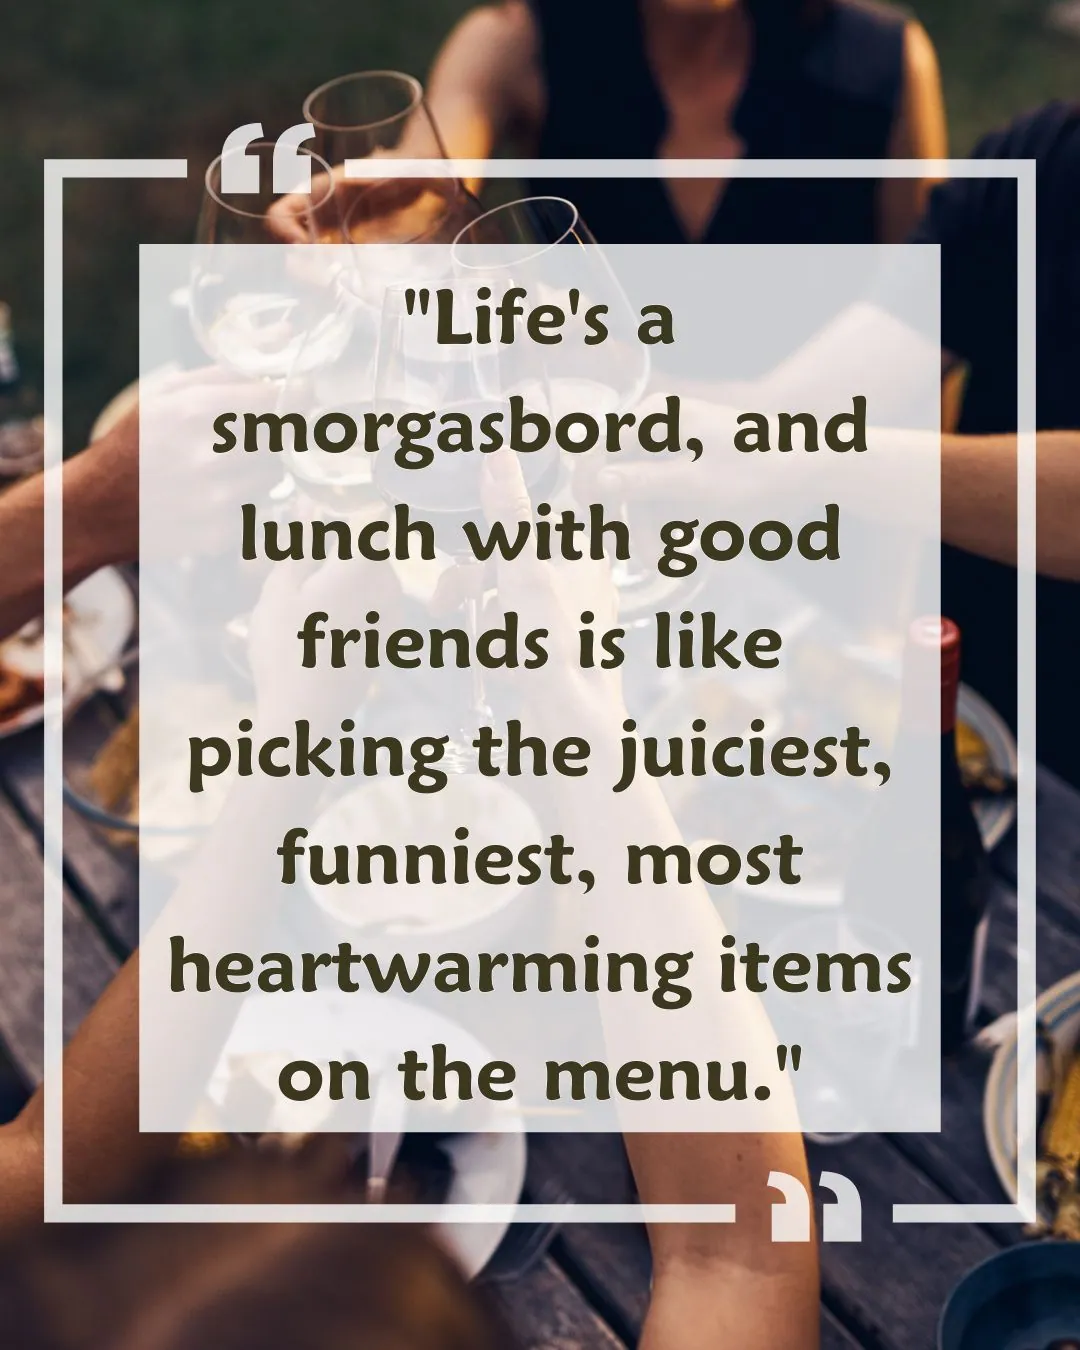 lunch with good friends quote with Image